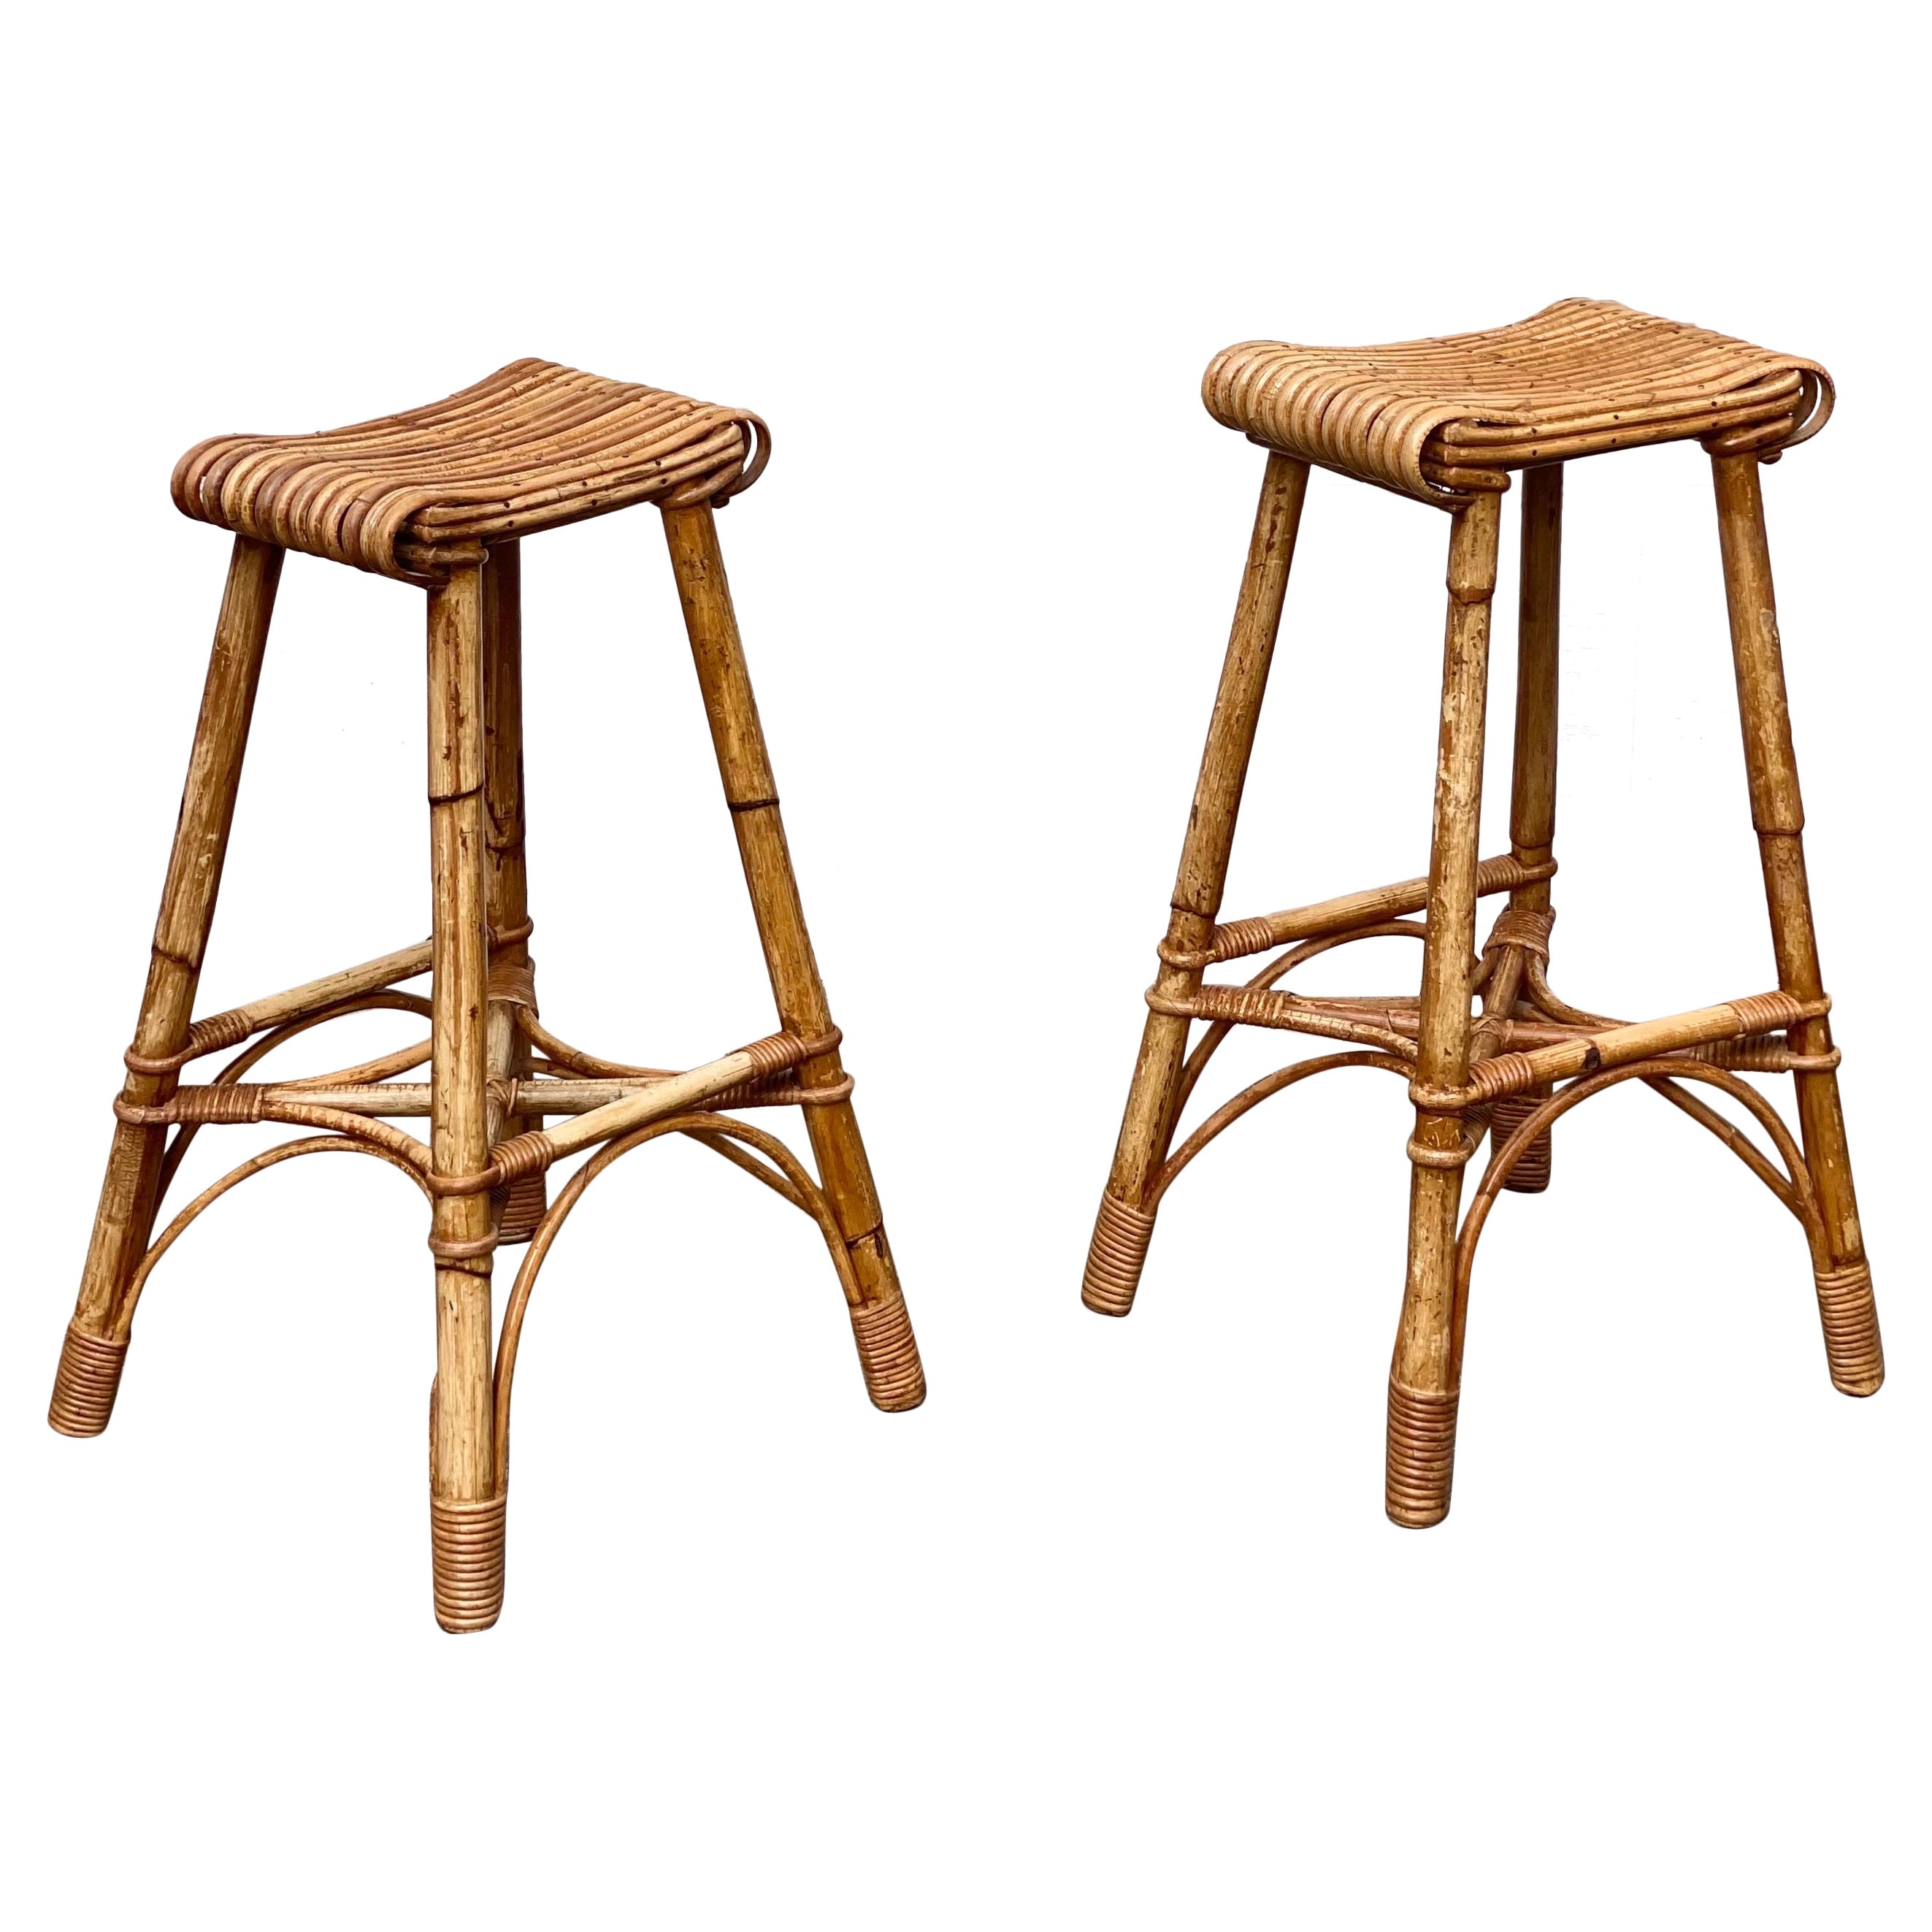 1940s Vintage English Bamboo Bar Stools – a Pair For Sale